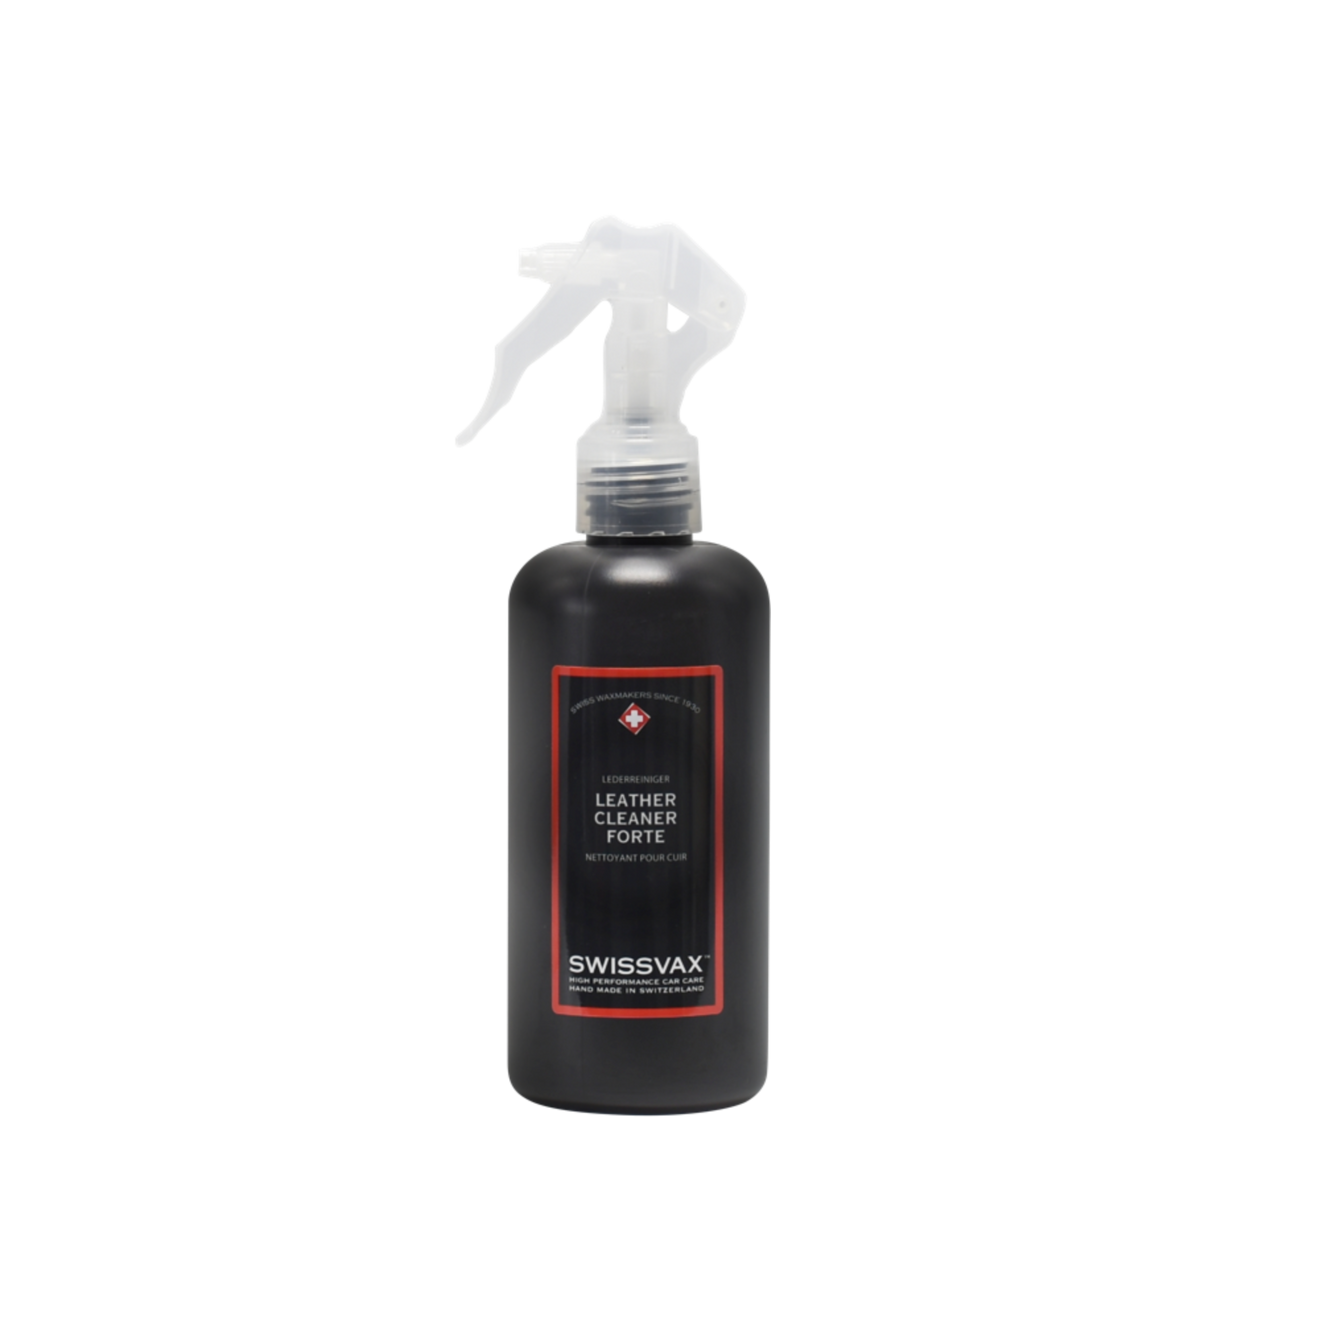 Swissvax Leather Cleaner Forte